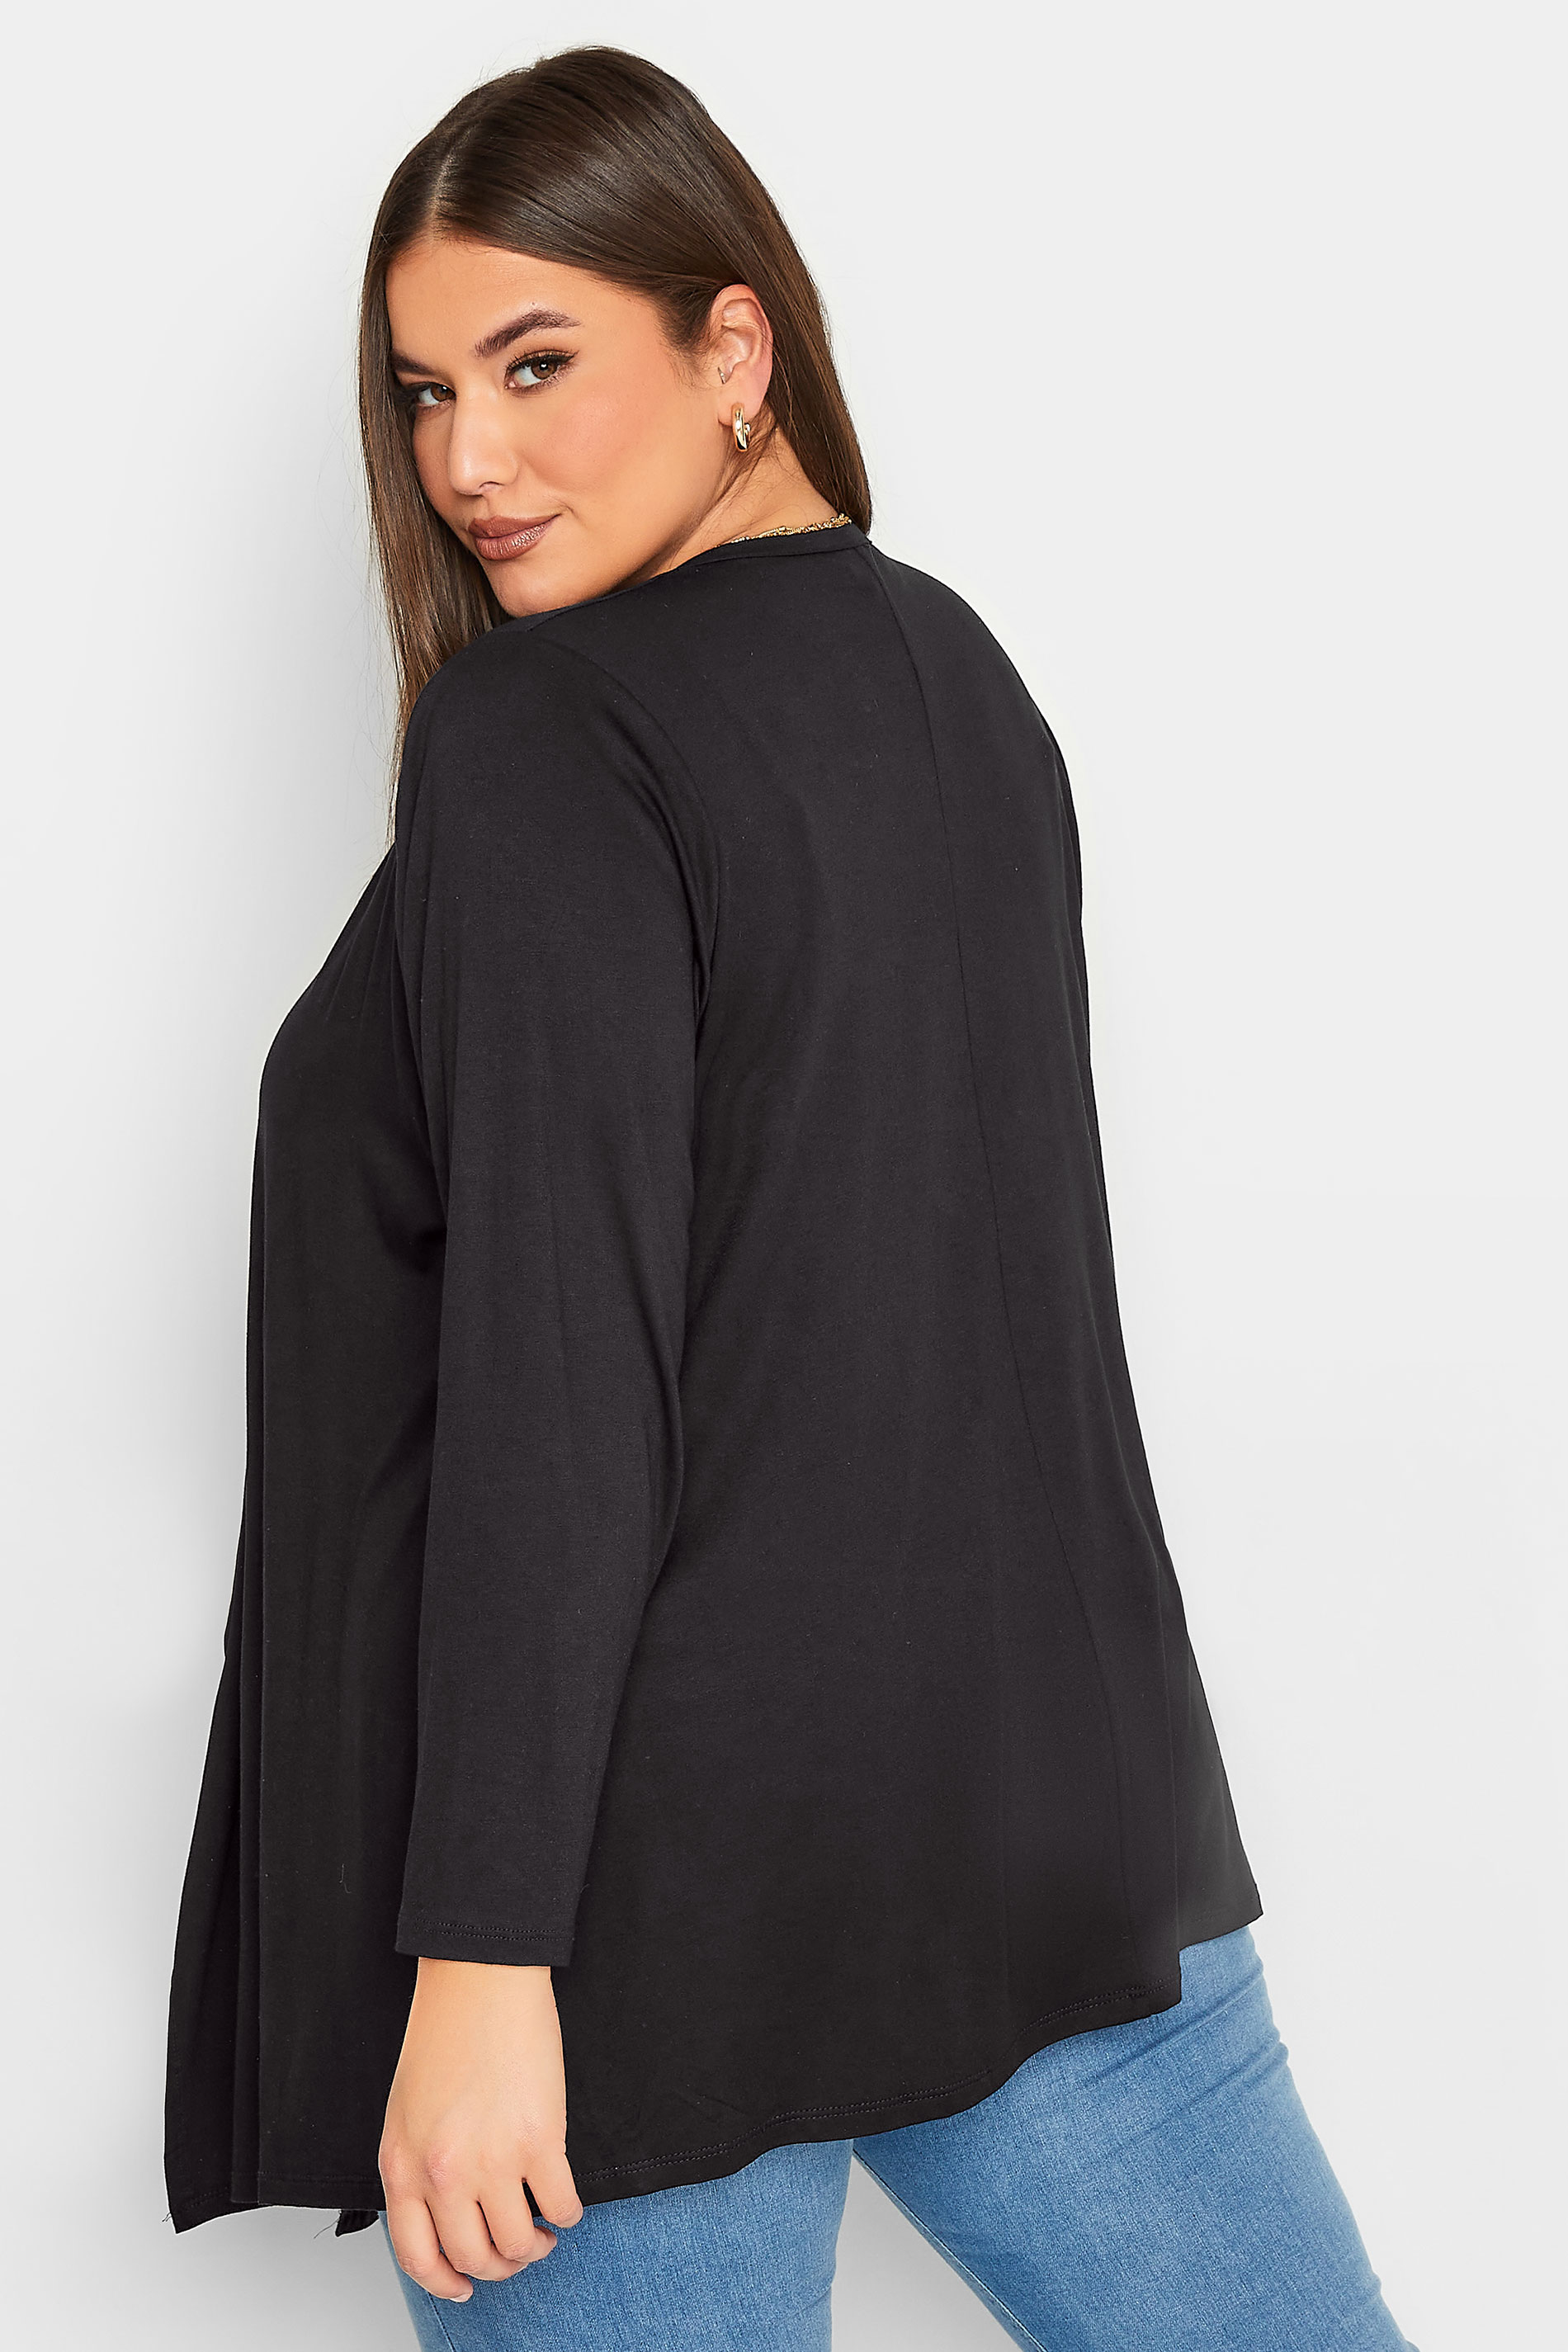 YOURS Plus Size Black Edge To Edge Waterfall Jersey Cardigan | Yours Clothing 3